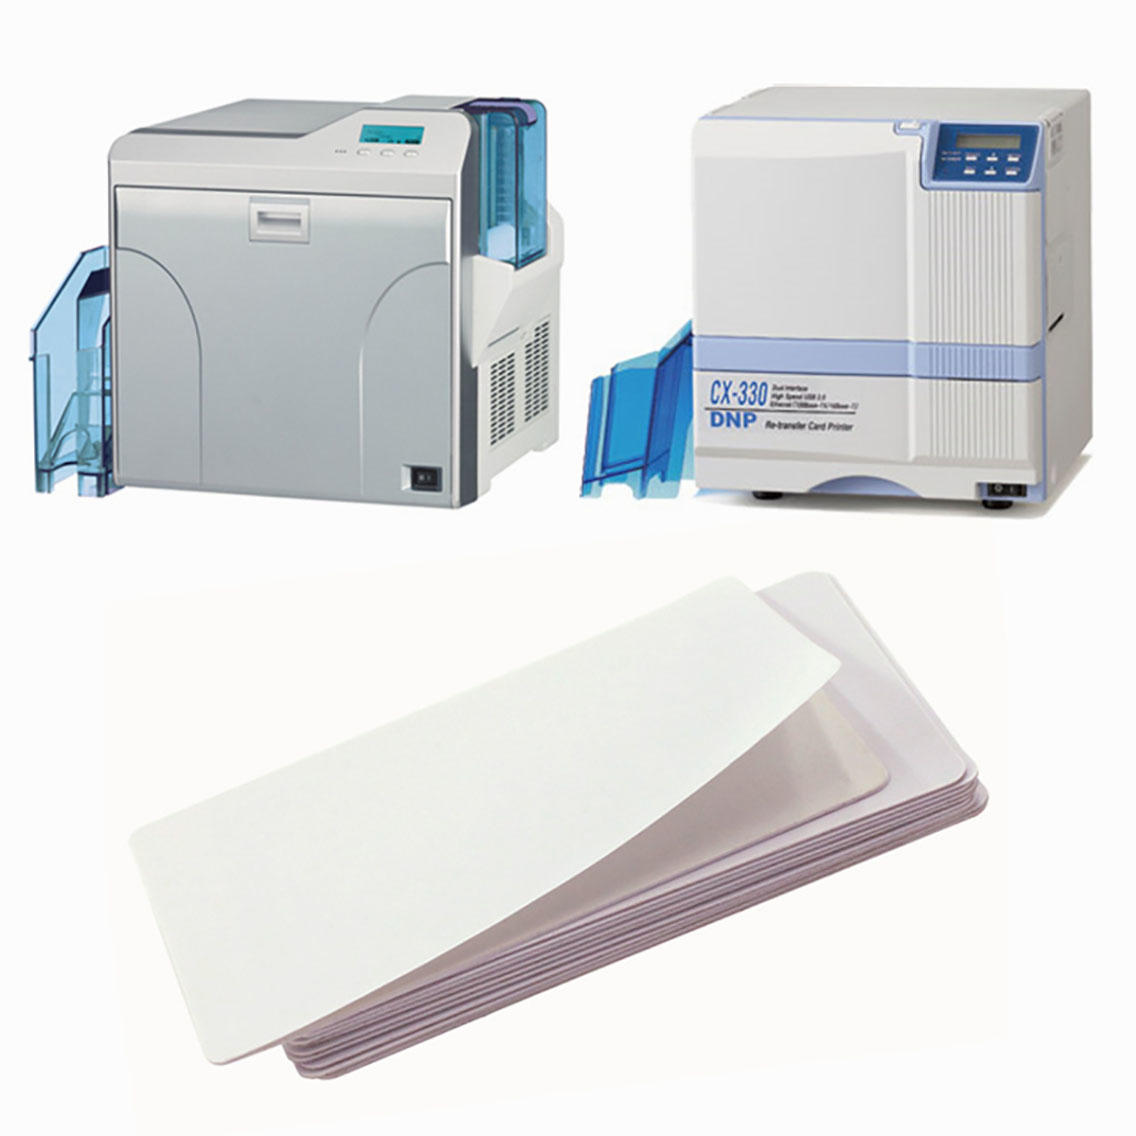 Cleanmo professional Dai Nippon Printer Cleaning Kits manufacturer for DNP CX-210, CX-320 & CX-330 Printers-2